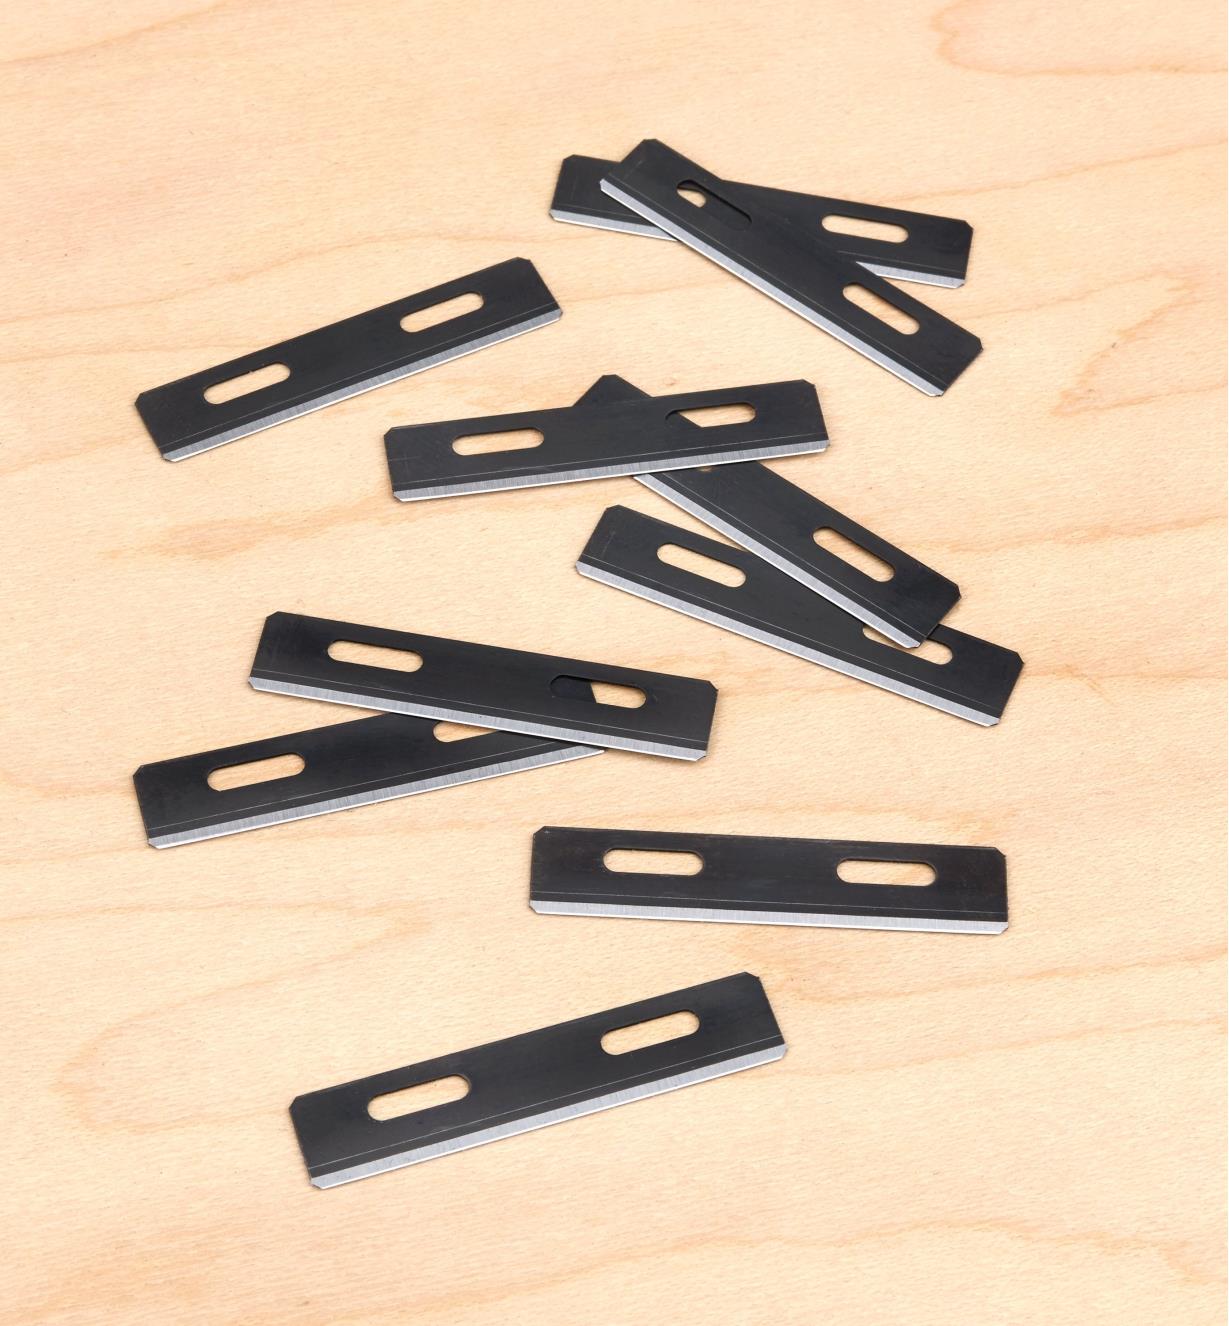 97K0802 - Replacement Blades for Leather Lacing Cutter, pkg. of 10